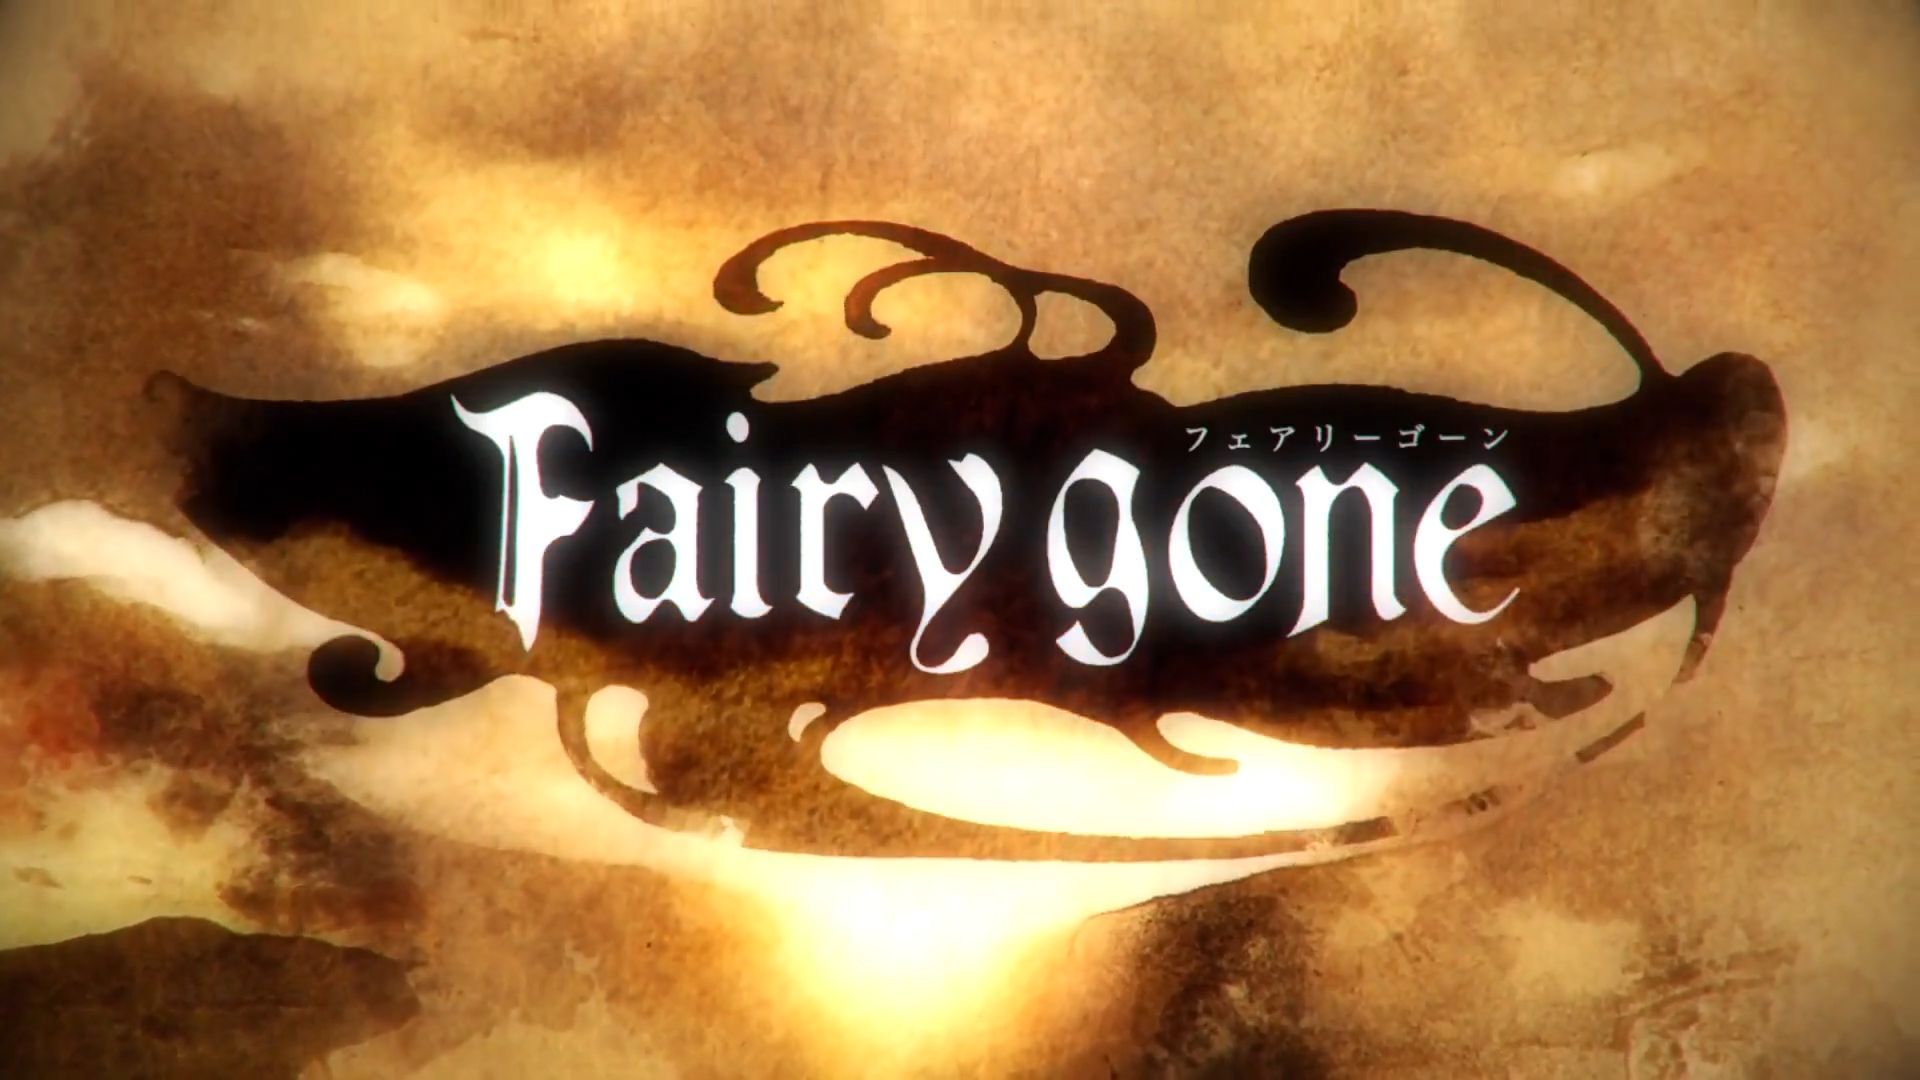 Fairy gone Season 1: Where To Watch Every Episode